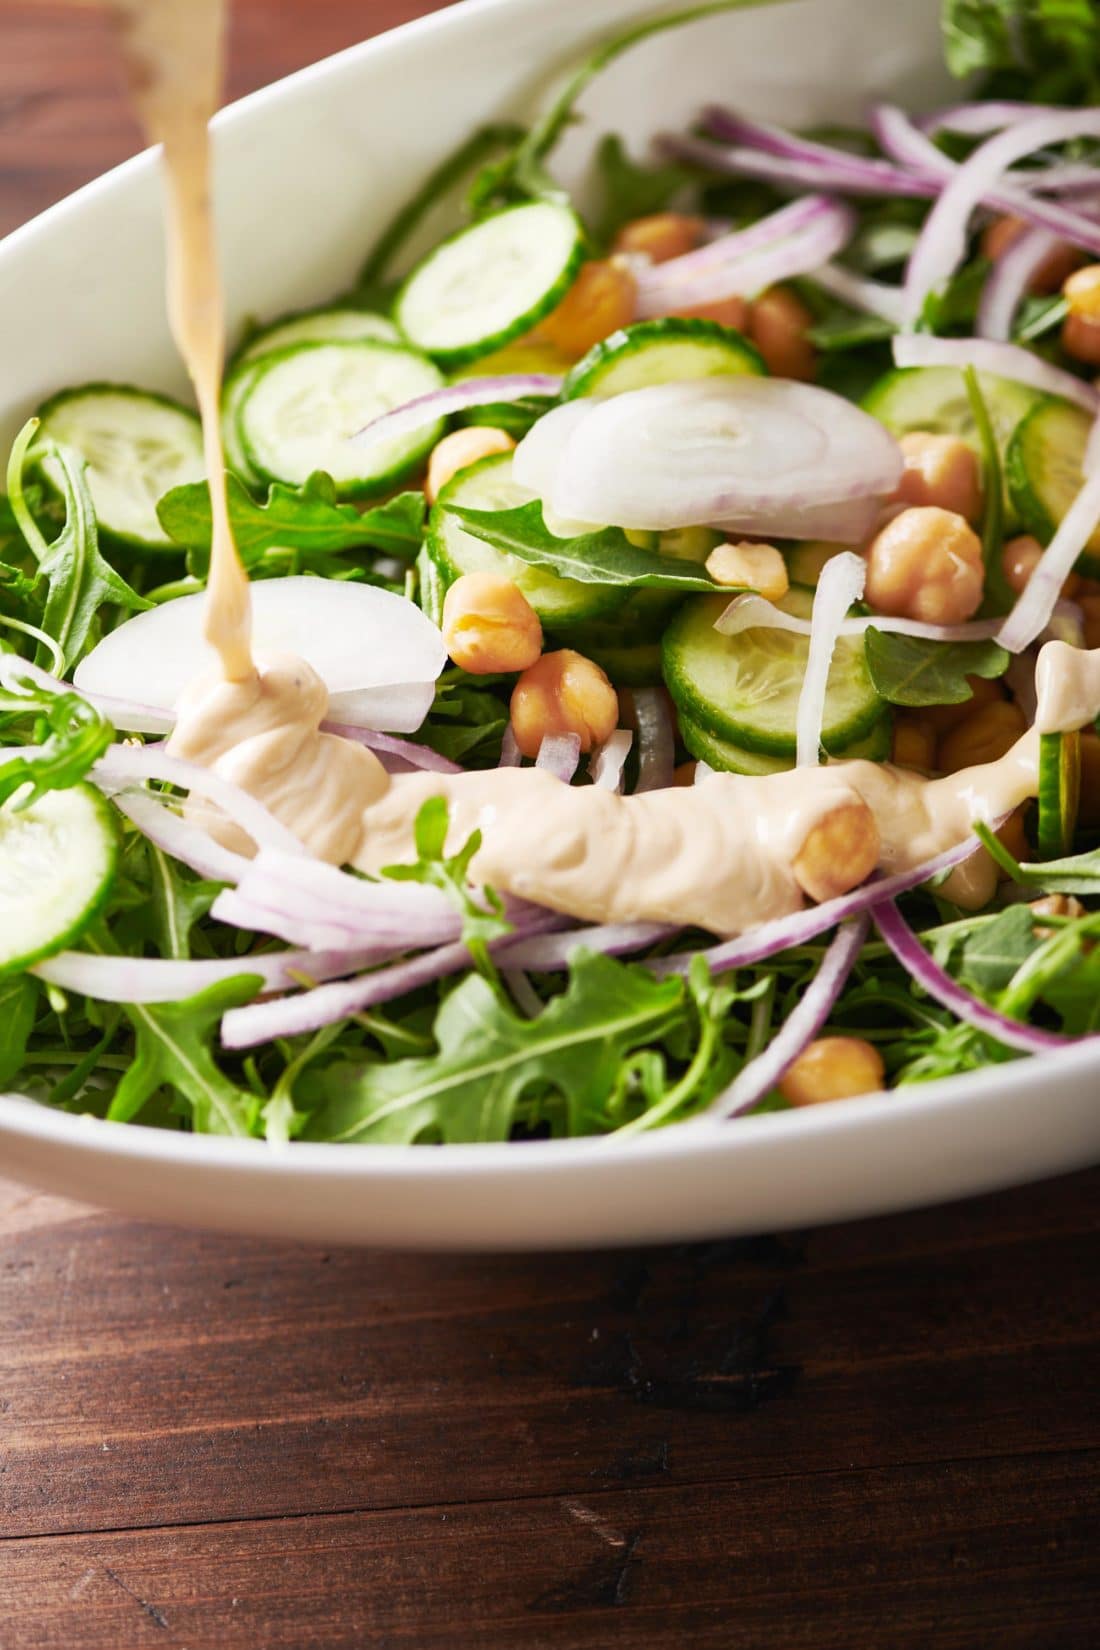 Spicy Honey Tahini Dressing pouring over a Green Salad with Chickpeas.